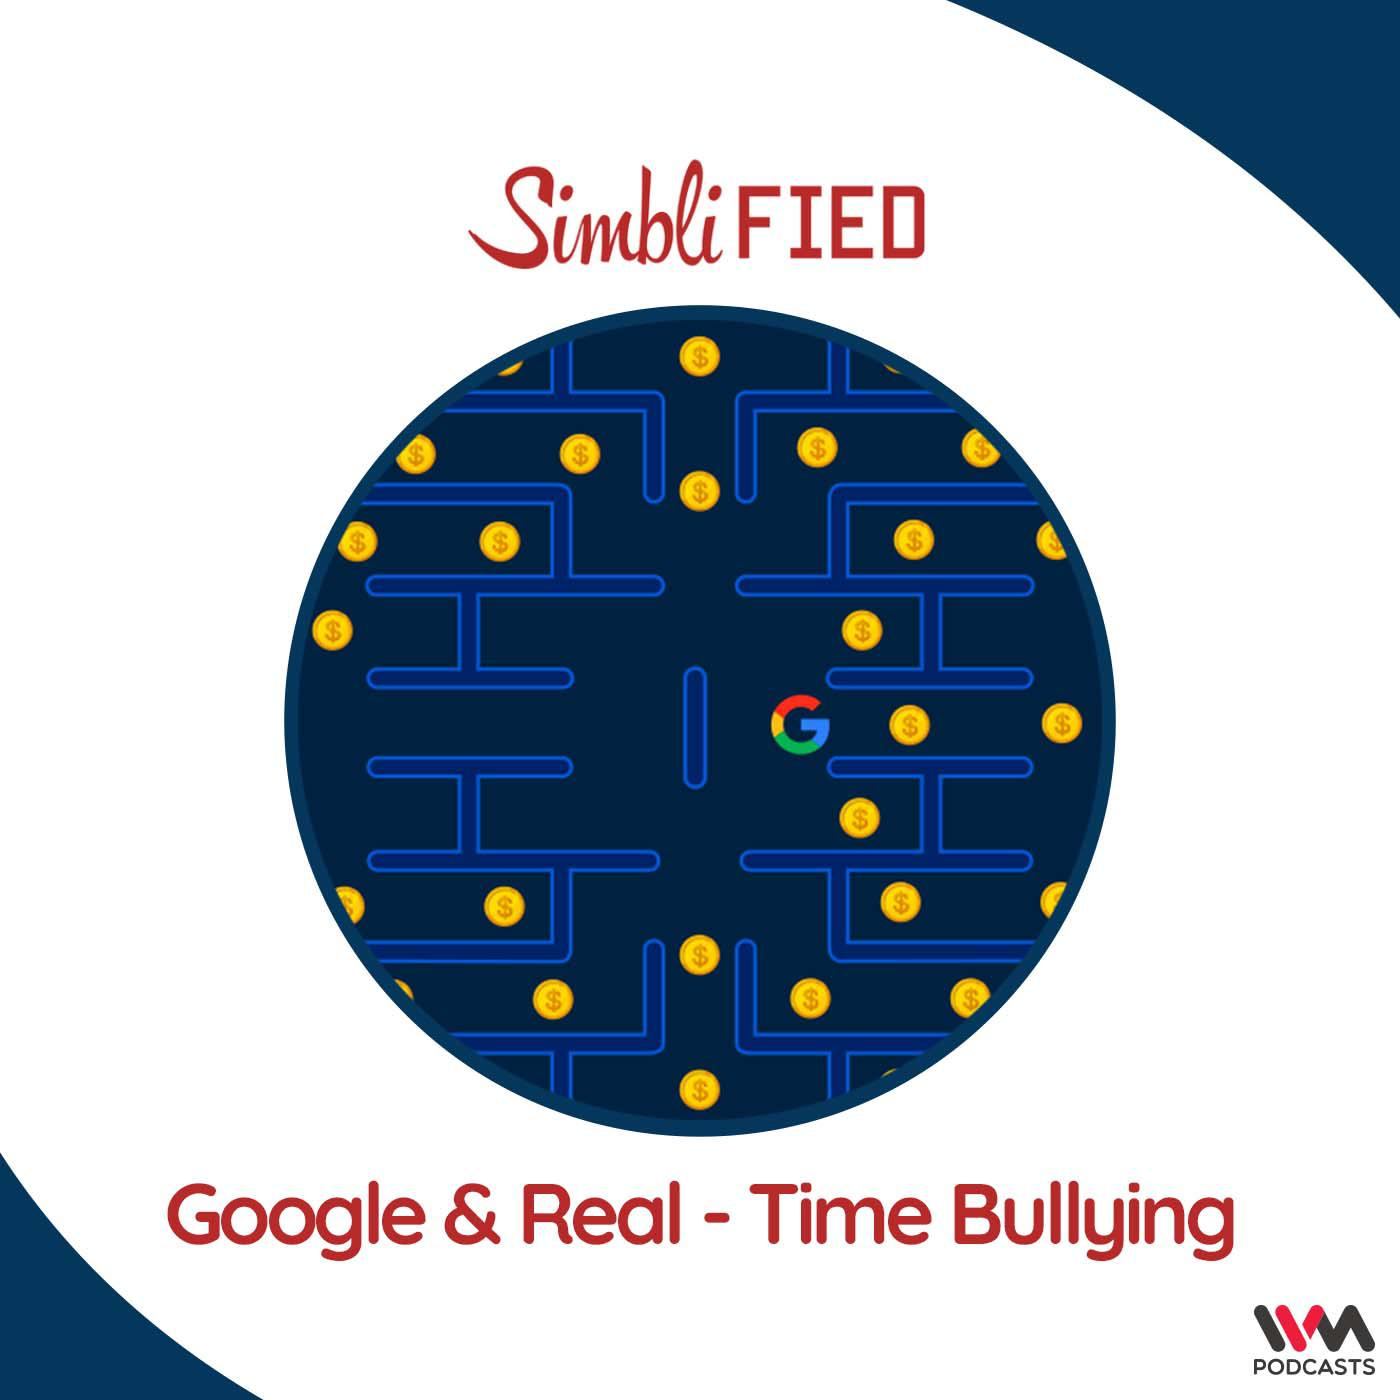 Google & Real - Time bullying